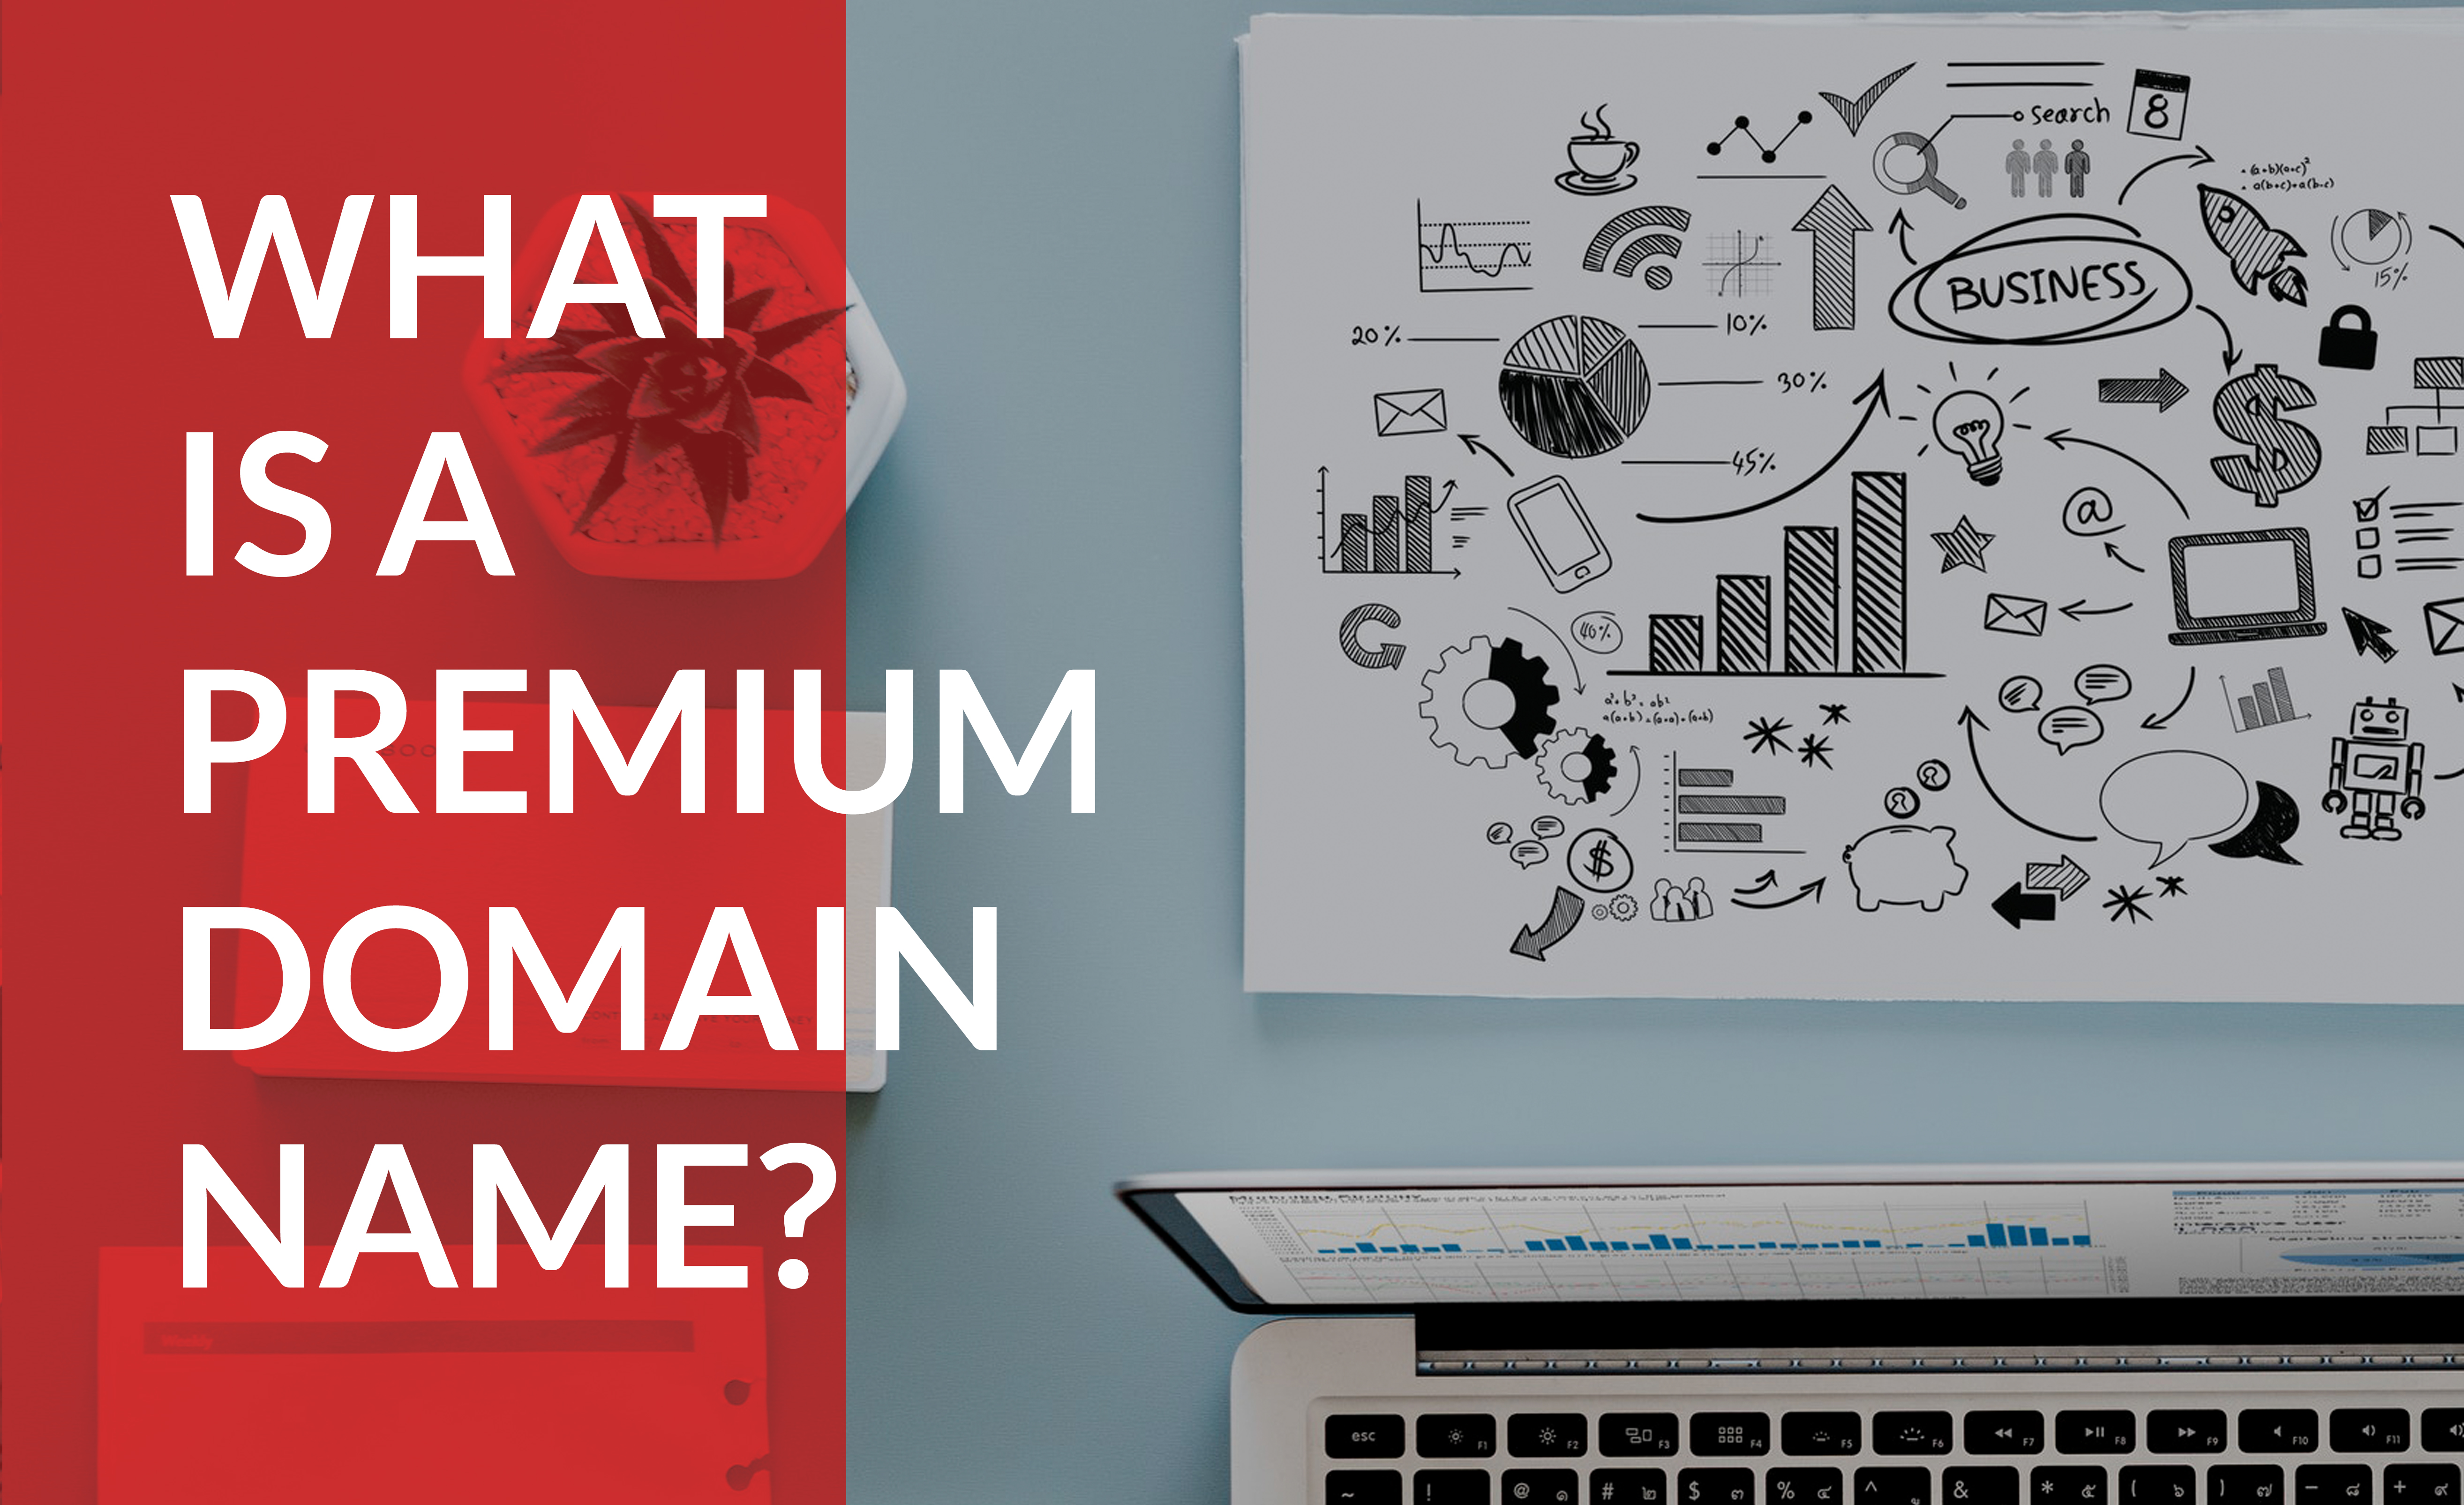 Should your business invest in a premium domain name?